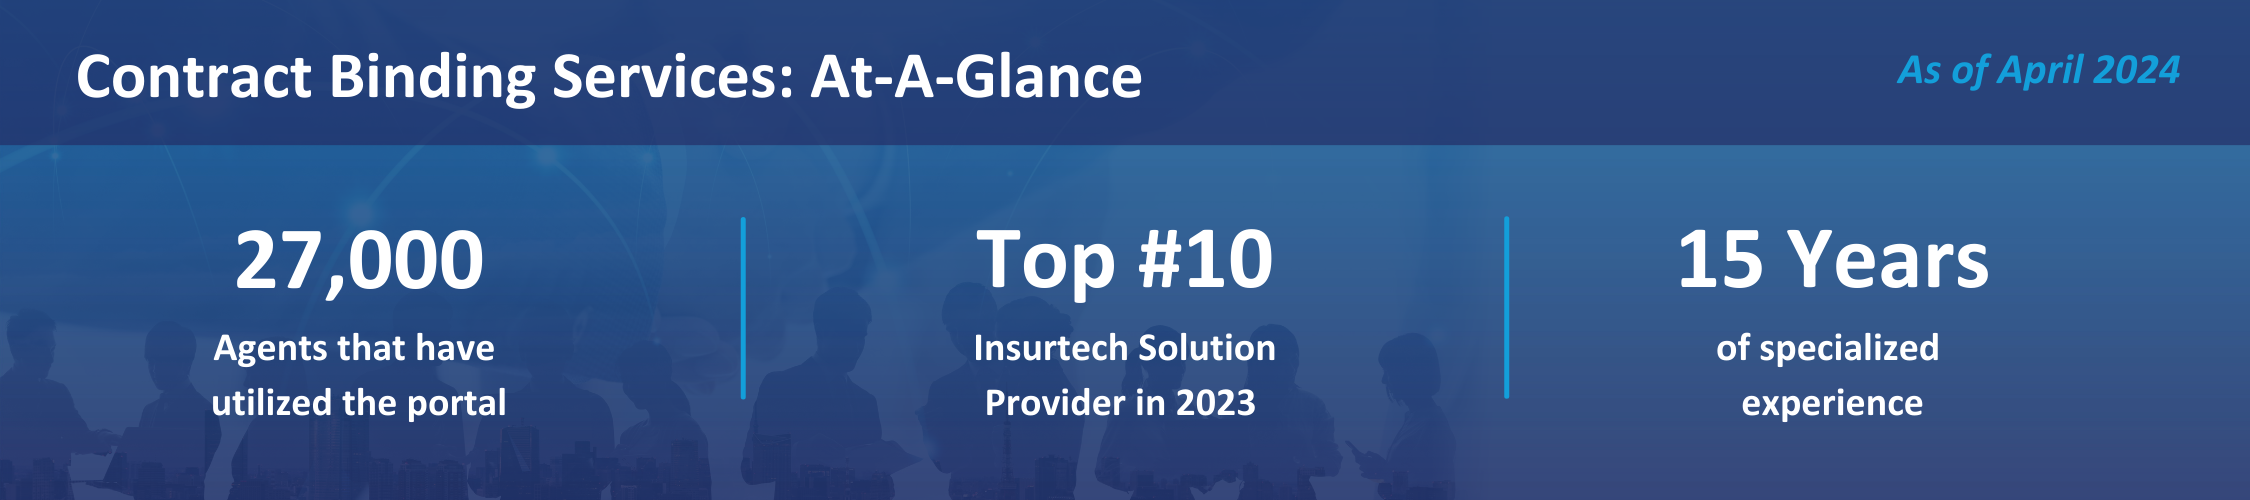 Contract Binding Services at a glance. 27,000 agents that have utilized the portal. Top number ten Insurtech solution provider in 2023. 15 years of specialized experience.